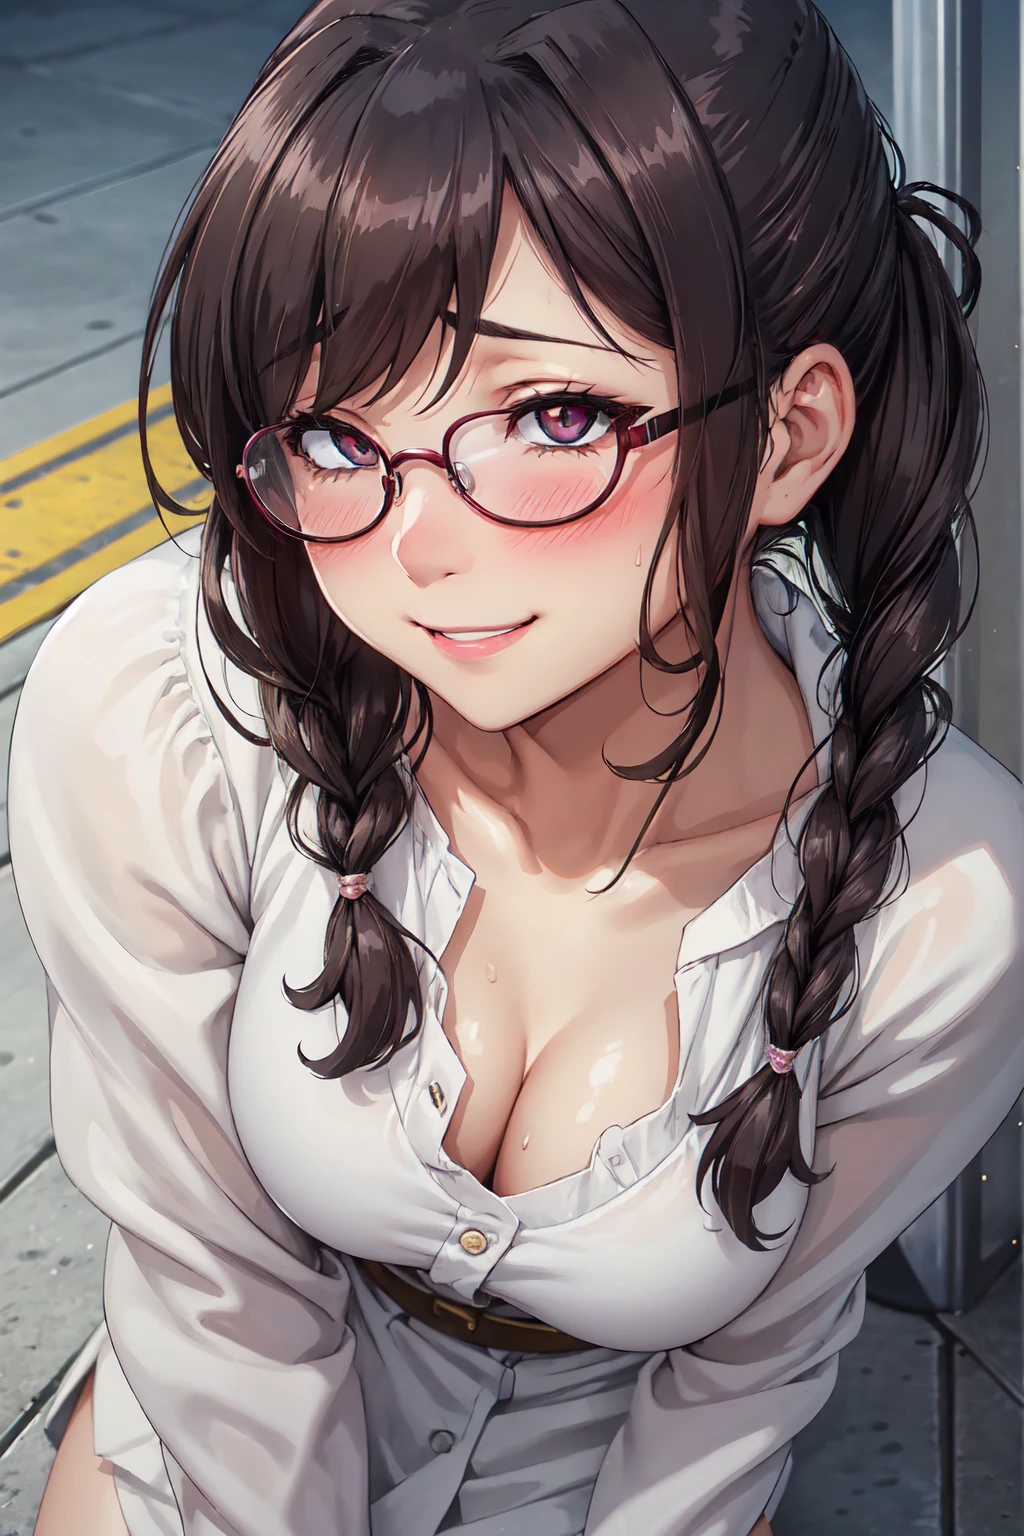 (high quality, High resolution, small details), sidewalk, side view, alone, girl, braid hair, , sparkling eyes, (large round frame glasses), (fine eyes), big breasts, ((gentle smile)), blush, Sweat, oily skin, (Focus plane), shallow depth of field,Disciplined smile,face with shadow